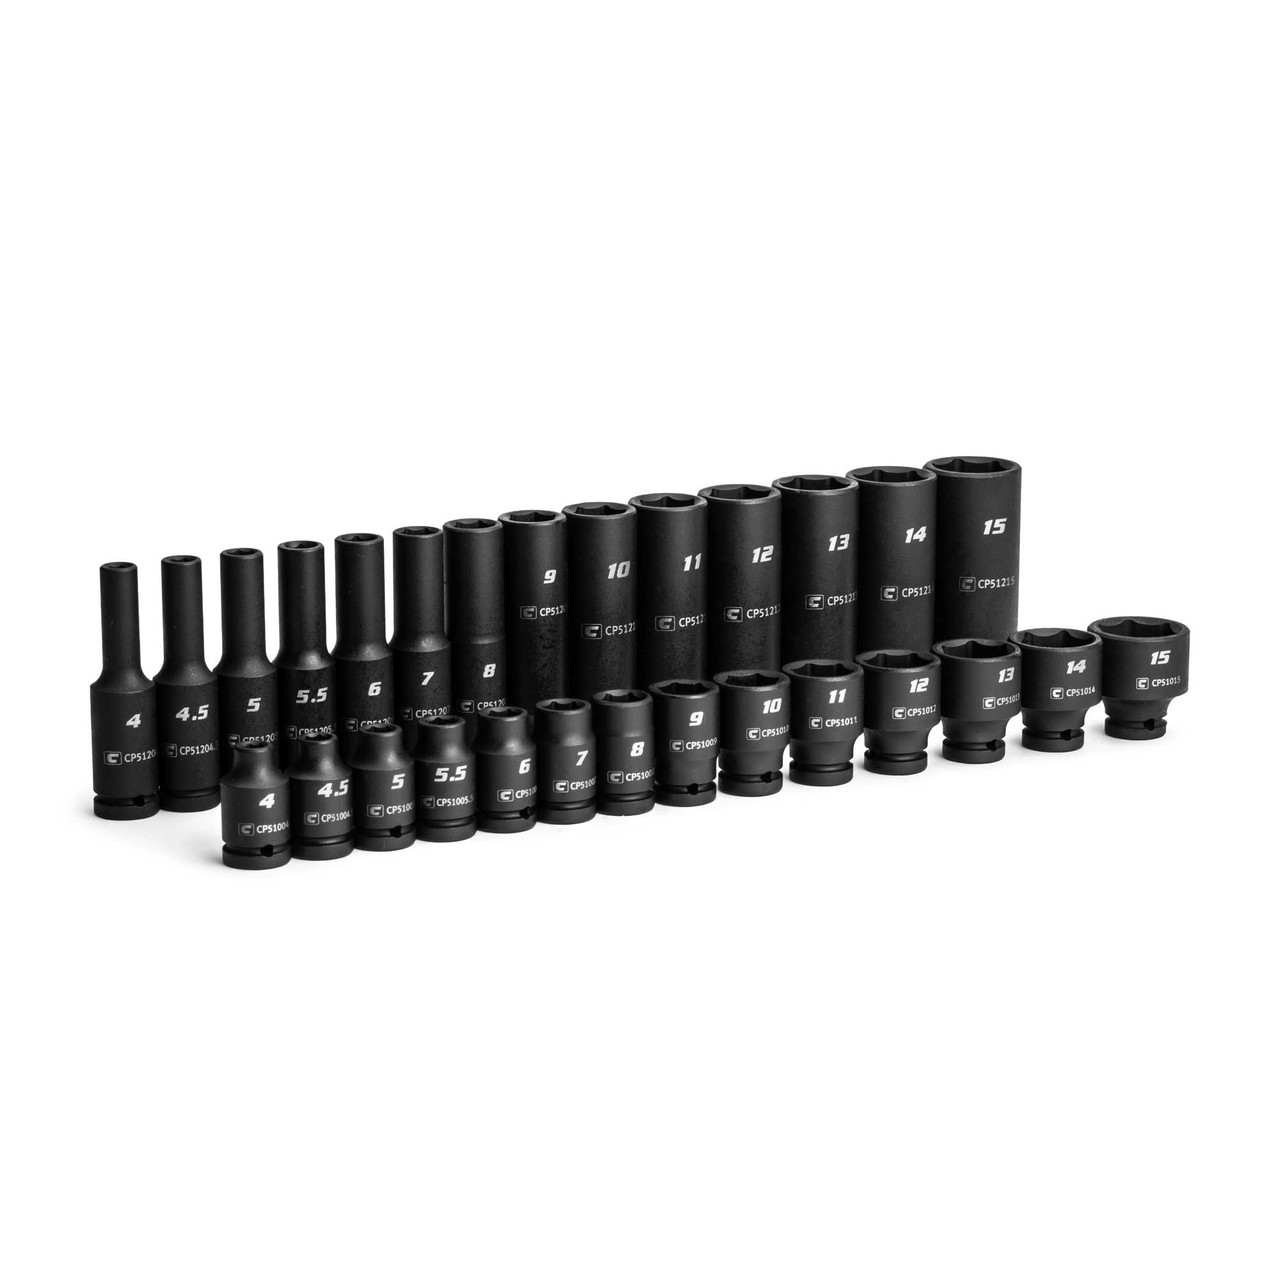 Capri Tools 1/4 in. Drive Shallow and Deep Impact Socket Set, 4 to 15 mm, Metric, 28-Piece